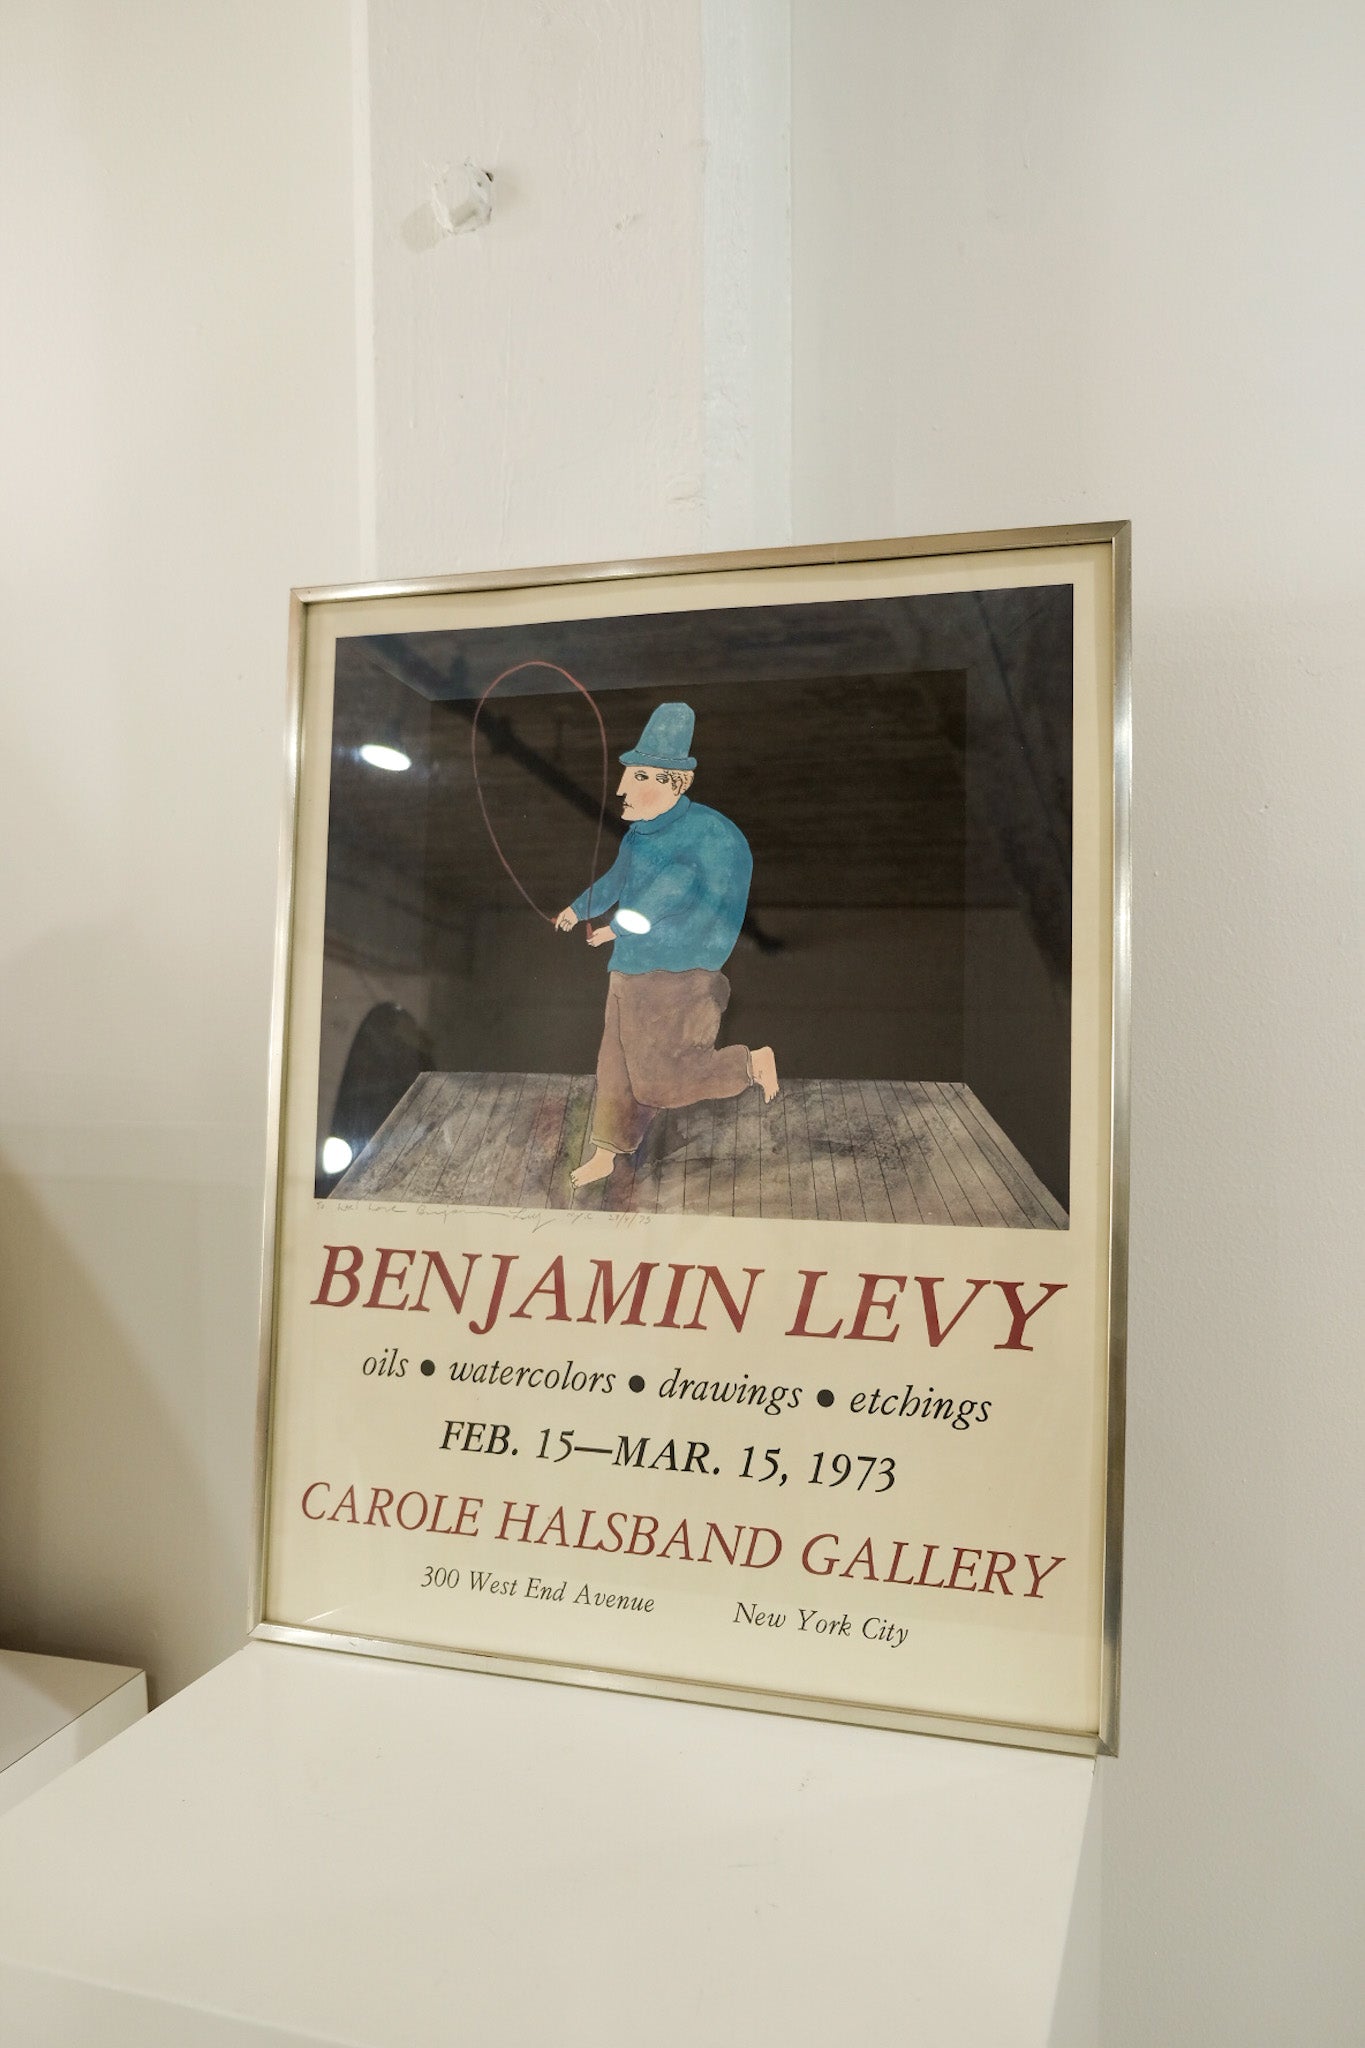 Benjamin Levy Carole Halsband Gallery Framed and Signed Print